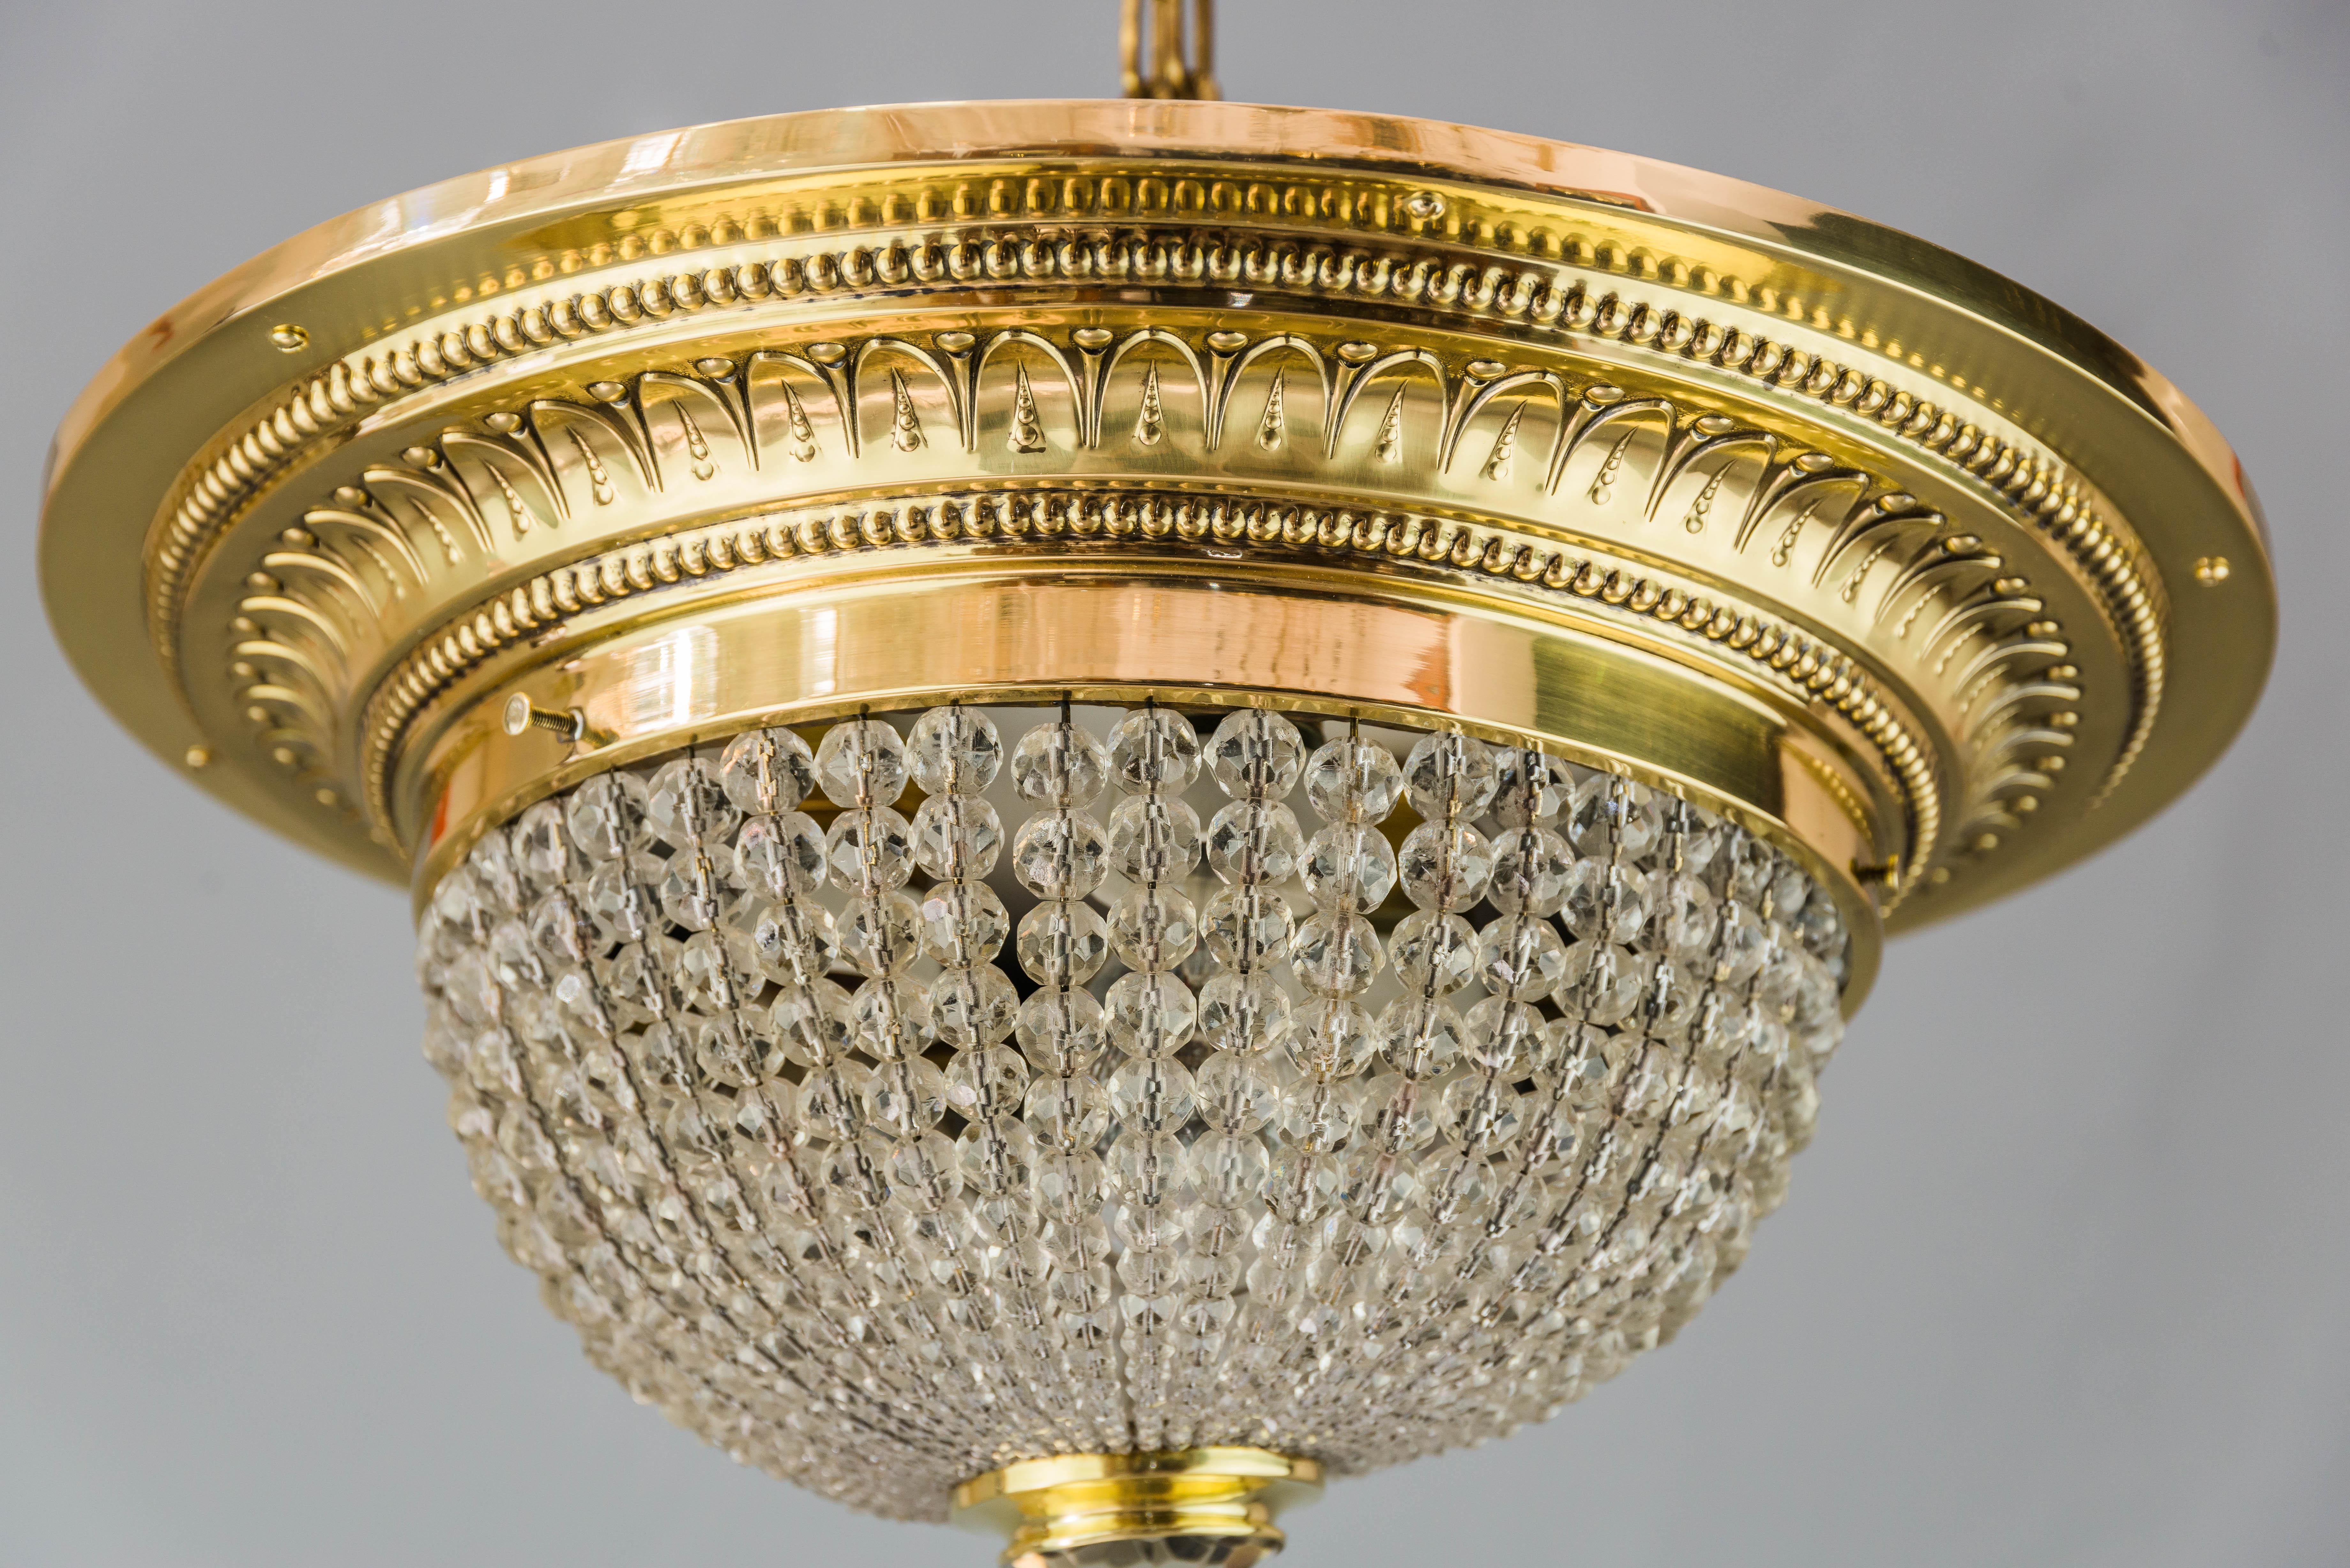 Art Deco ceiling lamp with small cut glass balls, circa 1920s.
Polished and stove enameled.